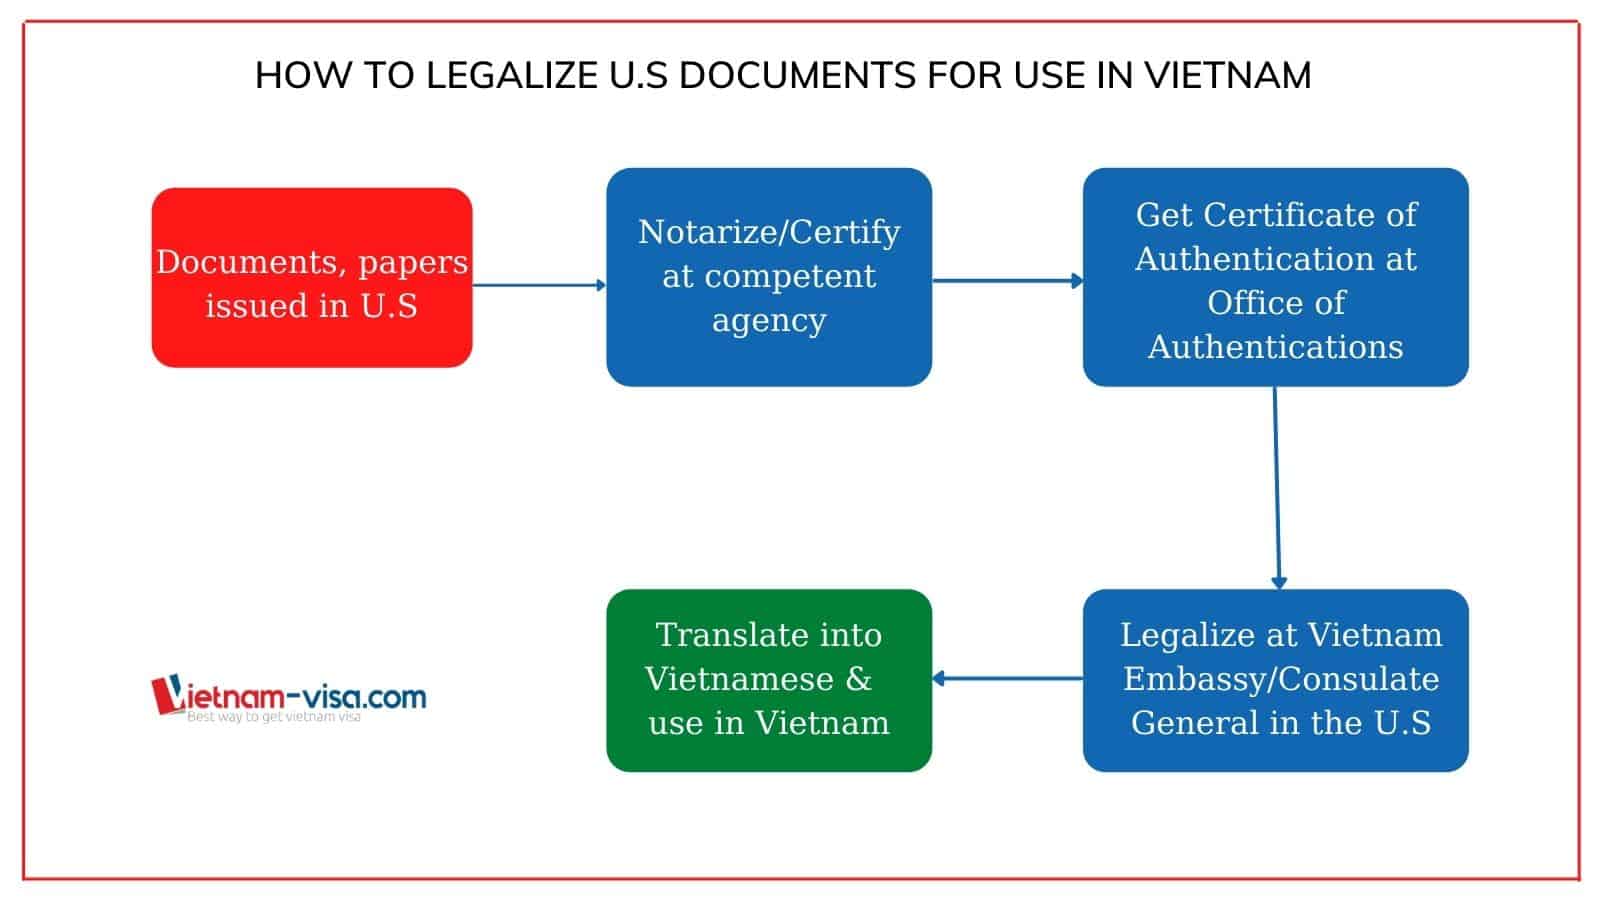 How to legalize U.S documents, papers for use in Vietnam